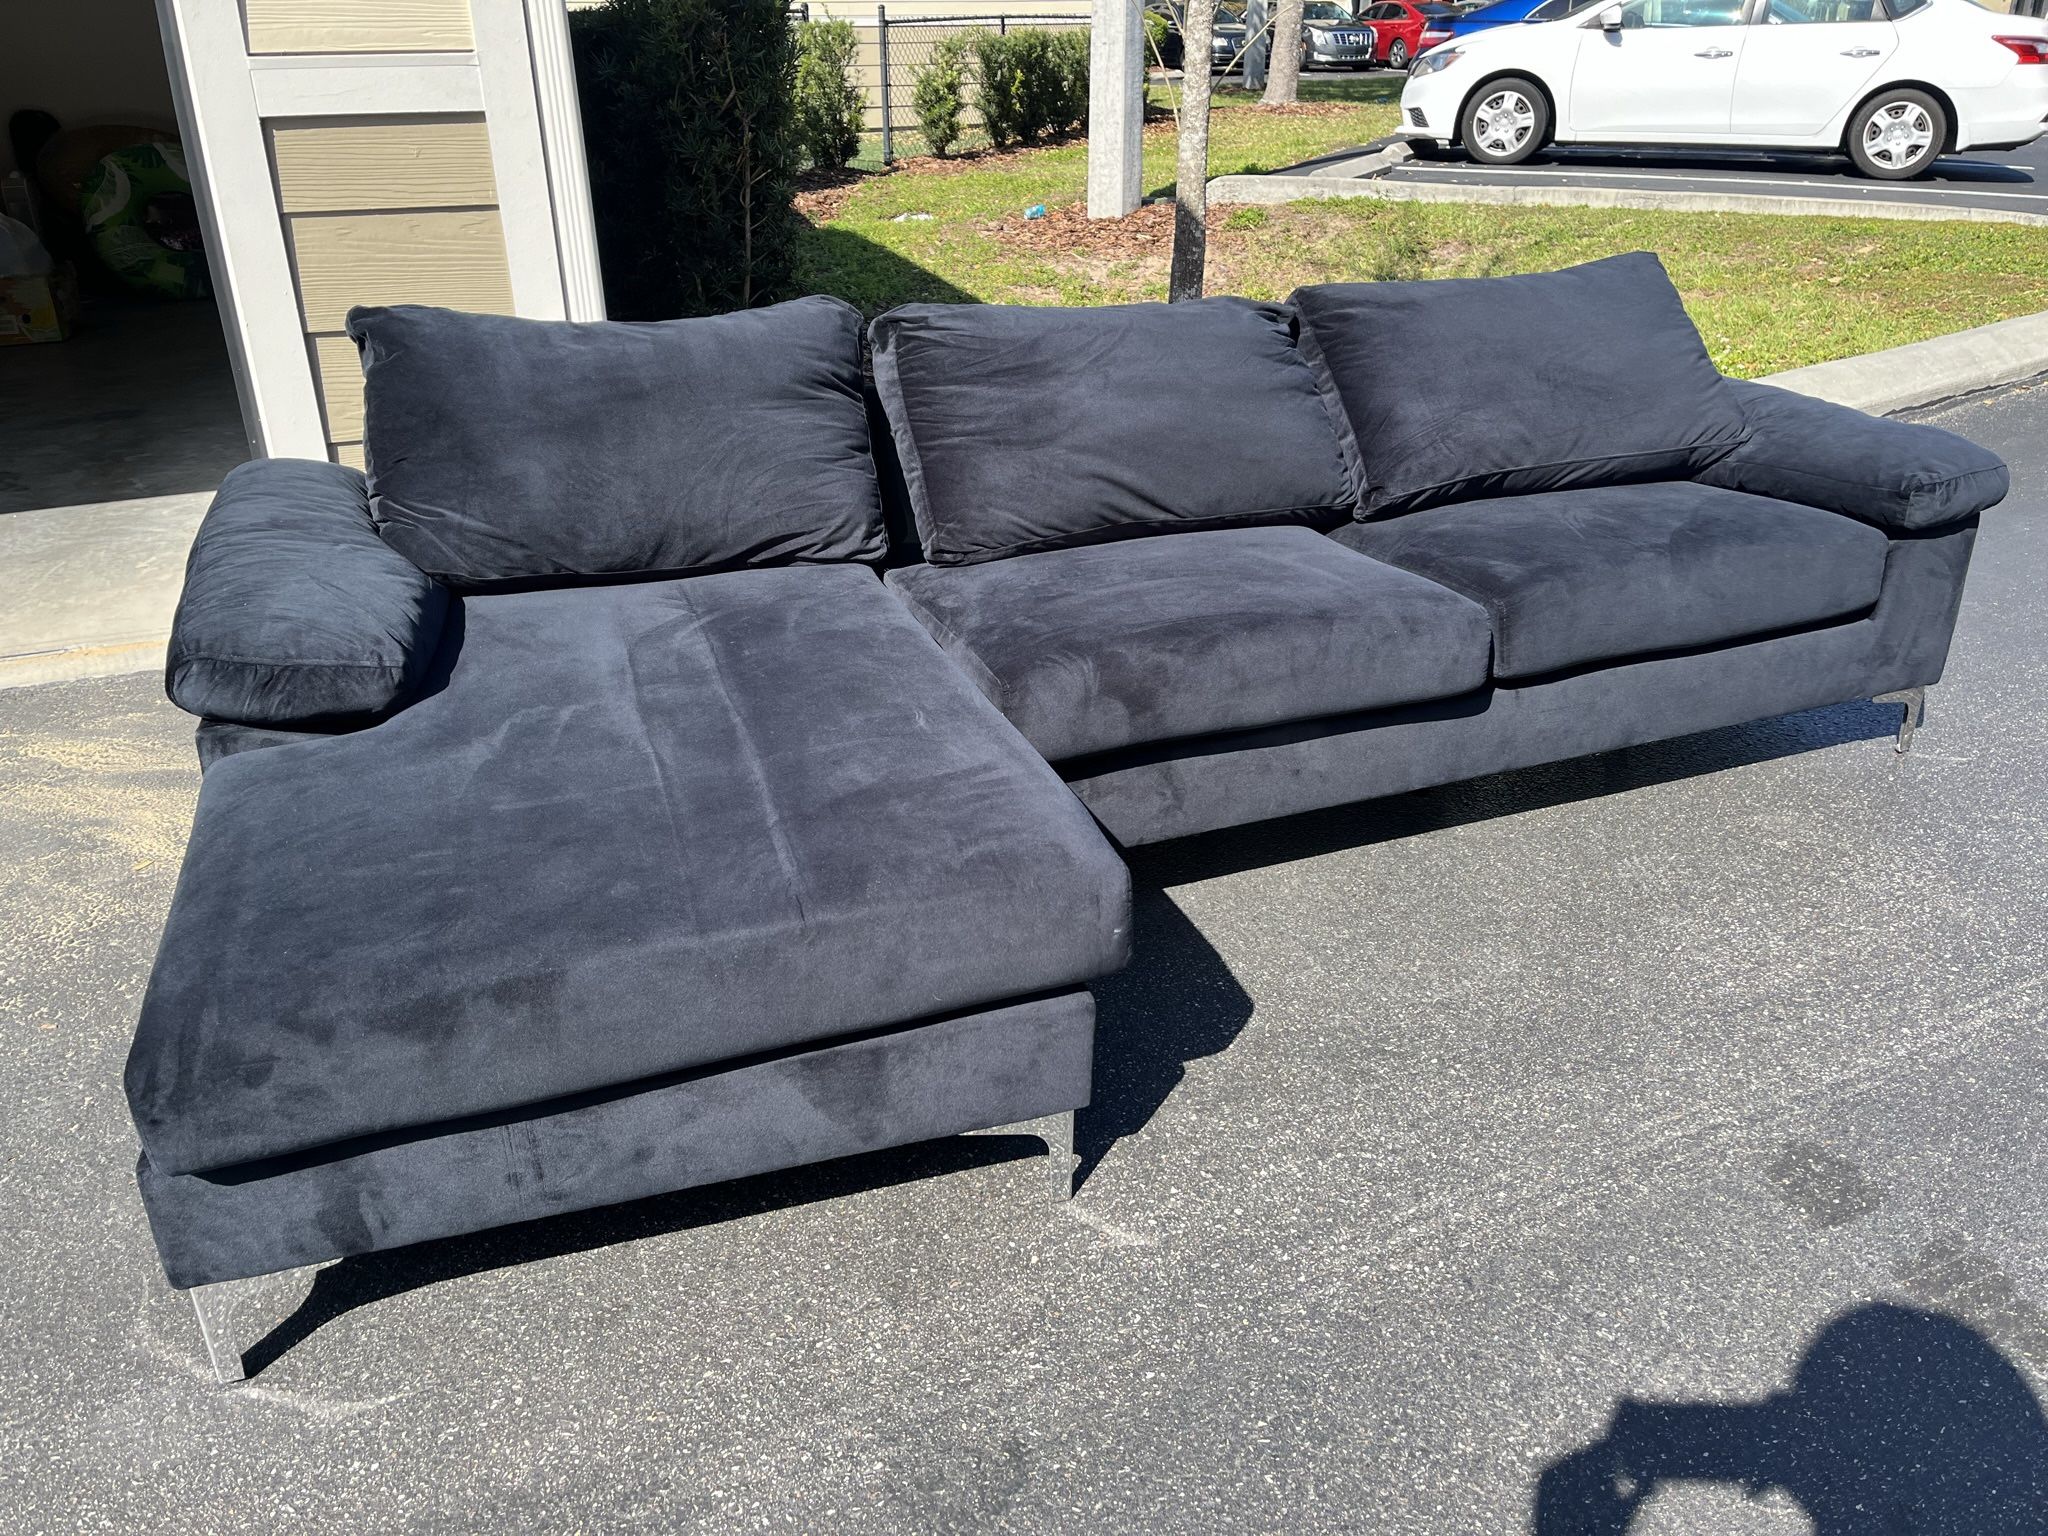 Suede Luxury Couch